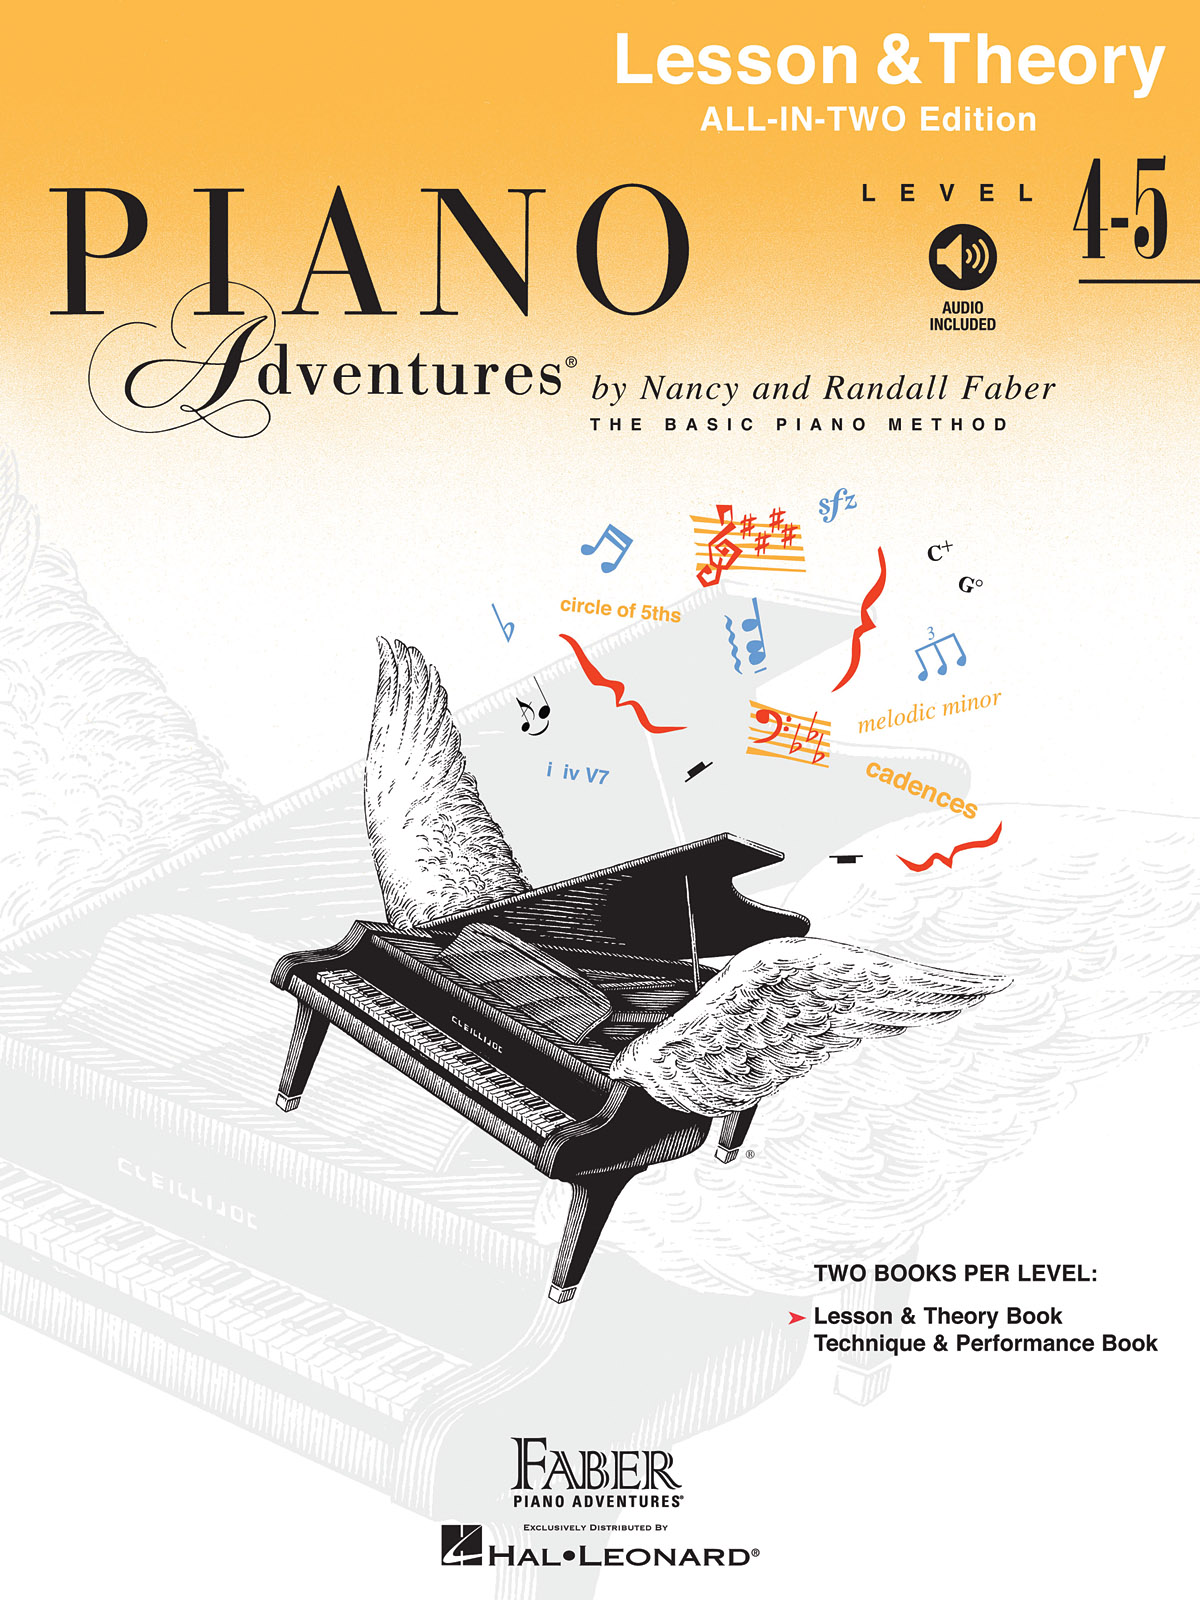 Nancy Faber Randall Faber: Piano Adventures All-In-Two Level 4-5 Les&Theory: